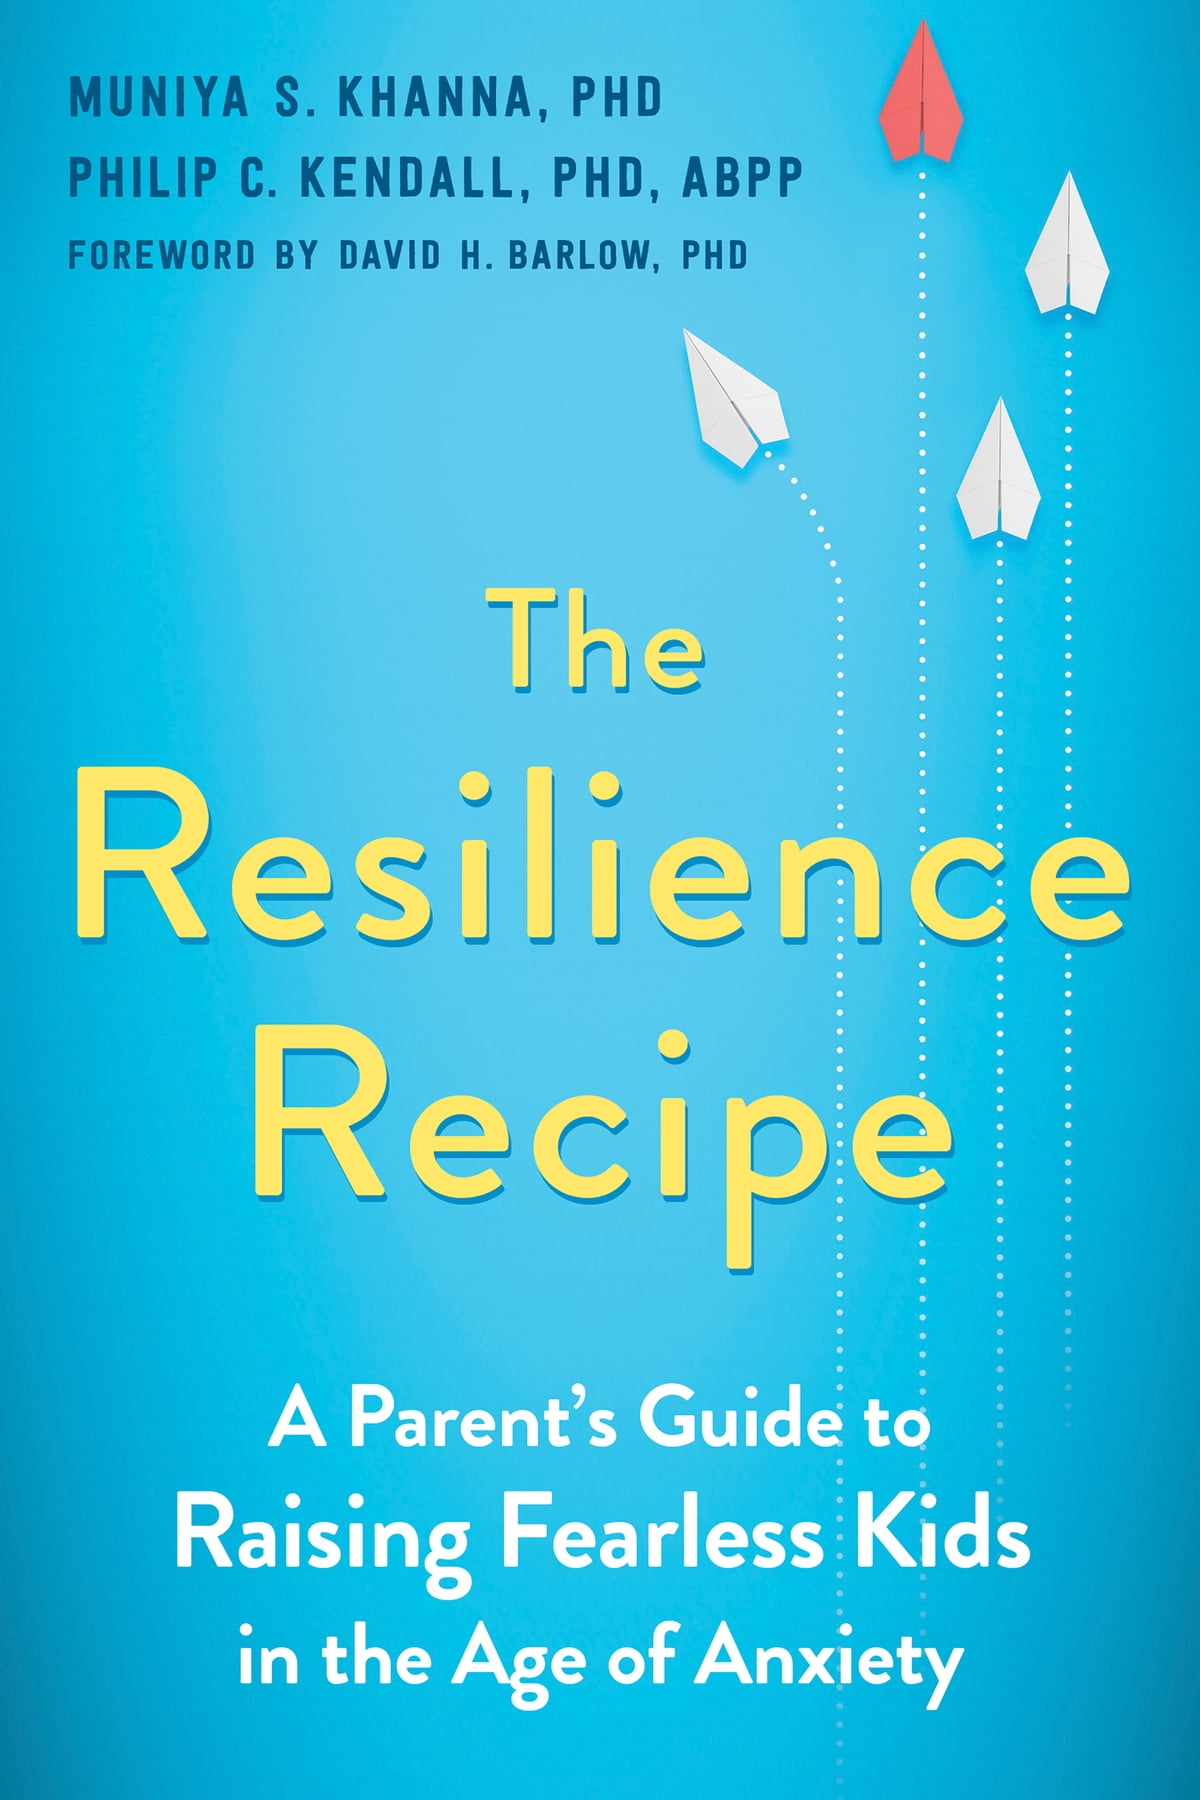 The Resilience Recipe by Muniya S. Khanna and Philip C. Kendall